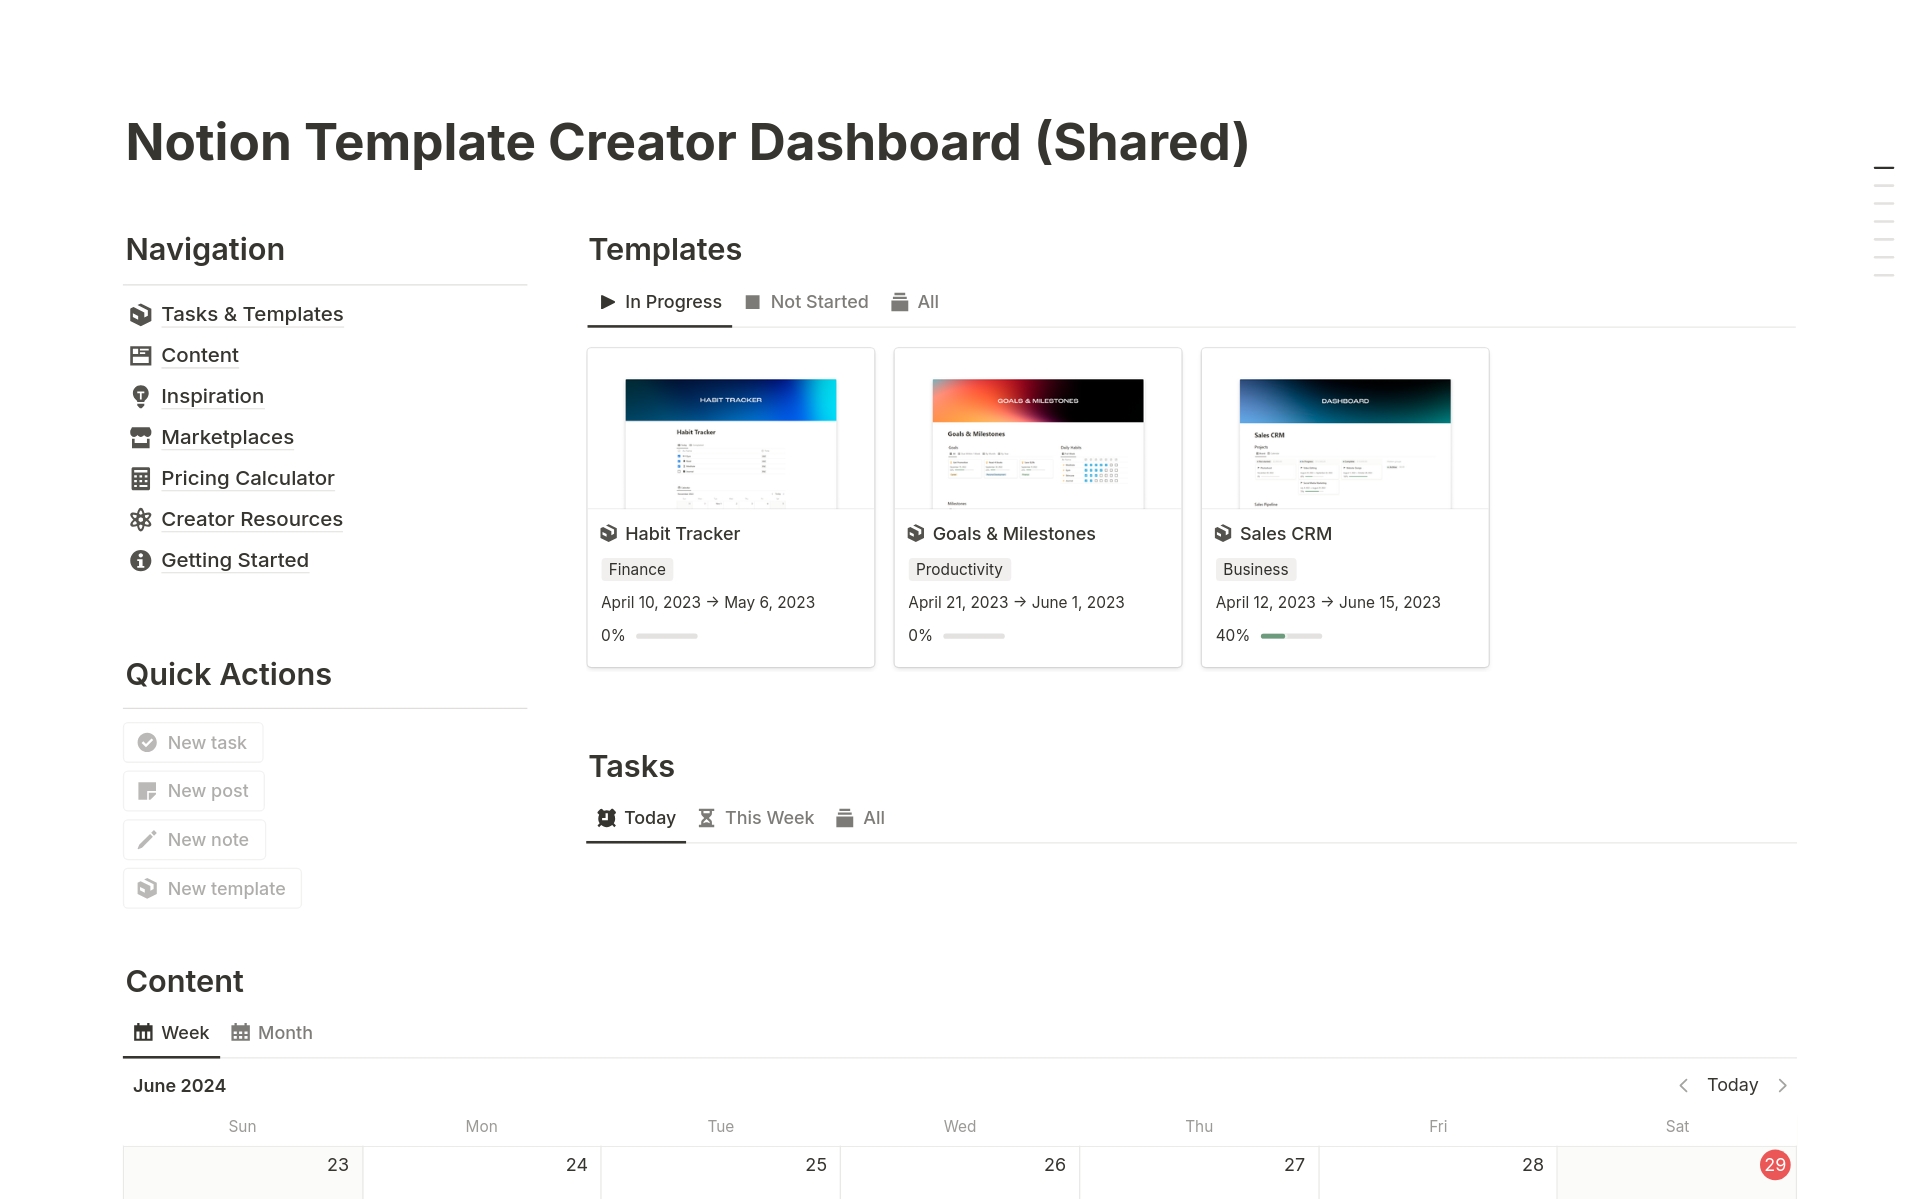 Notion Template Creator Dashboard is a powerful tool designed for people who create and sell Notion templates. With this product, you can launch your templates faster, stay organized with your tasks, and plan your social and marketing content with ease.